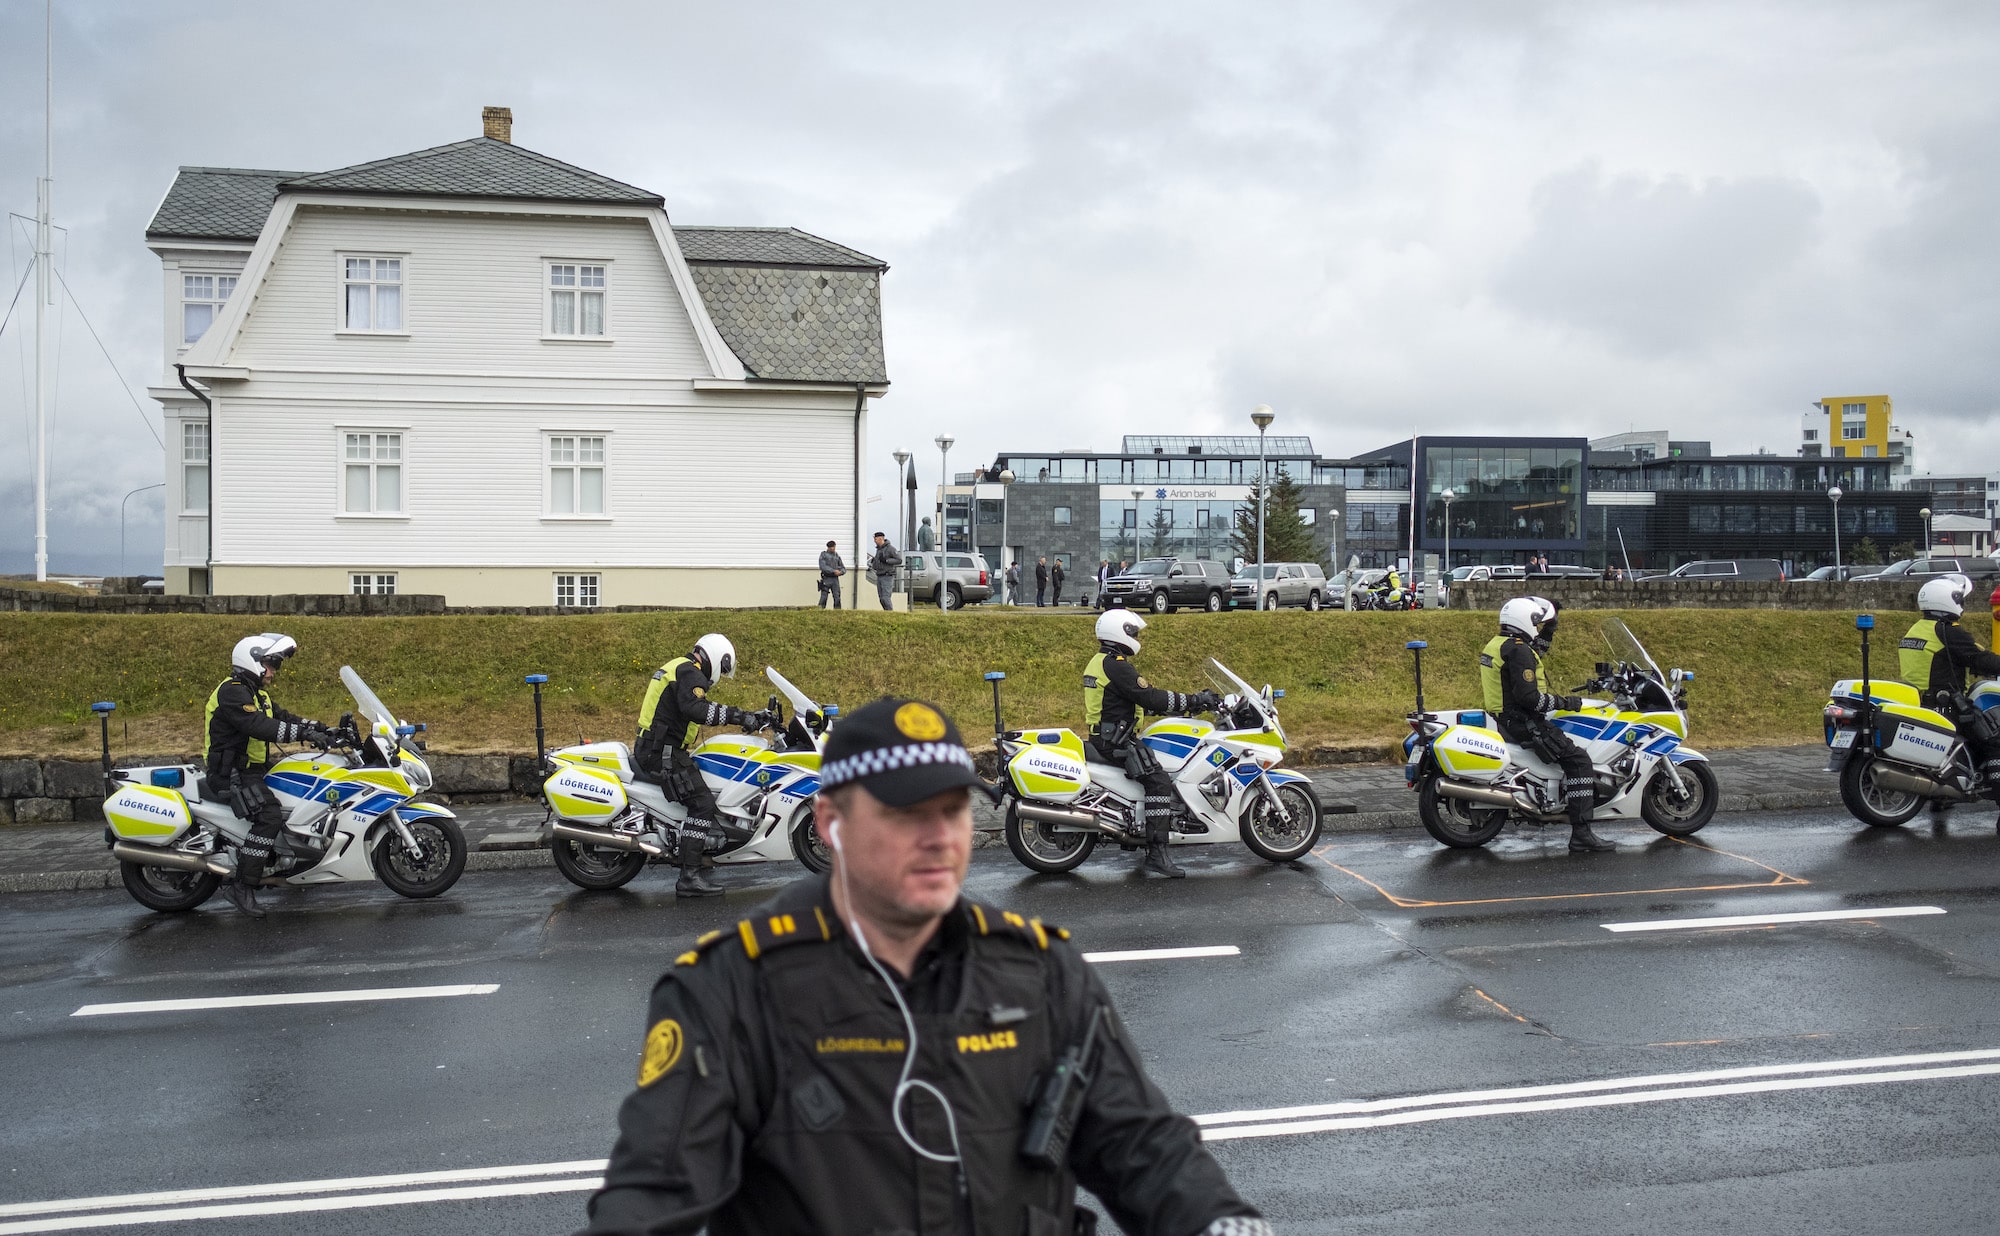 Armed Plain-Clothes Police and Snipers in Reykjavík for Council of Europe Summit